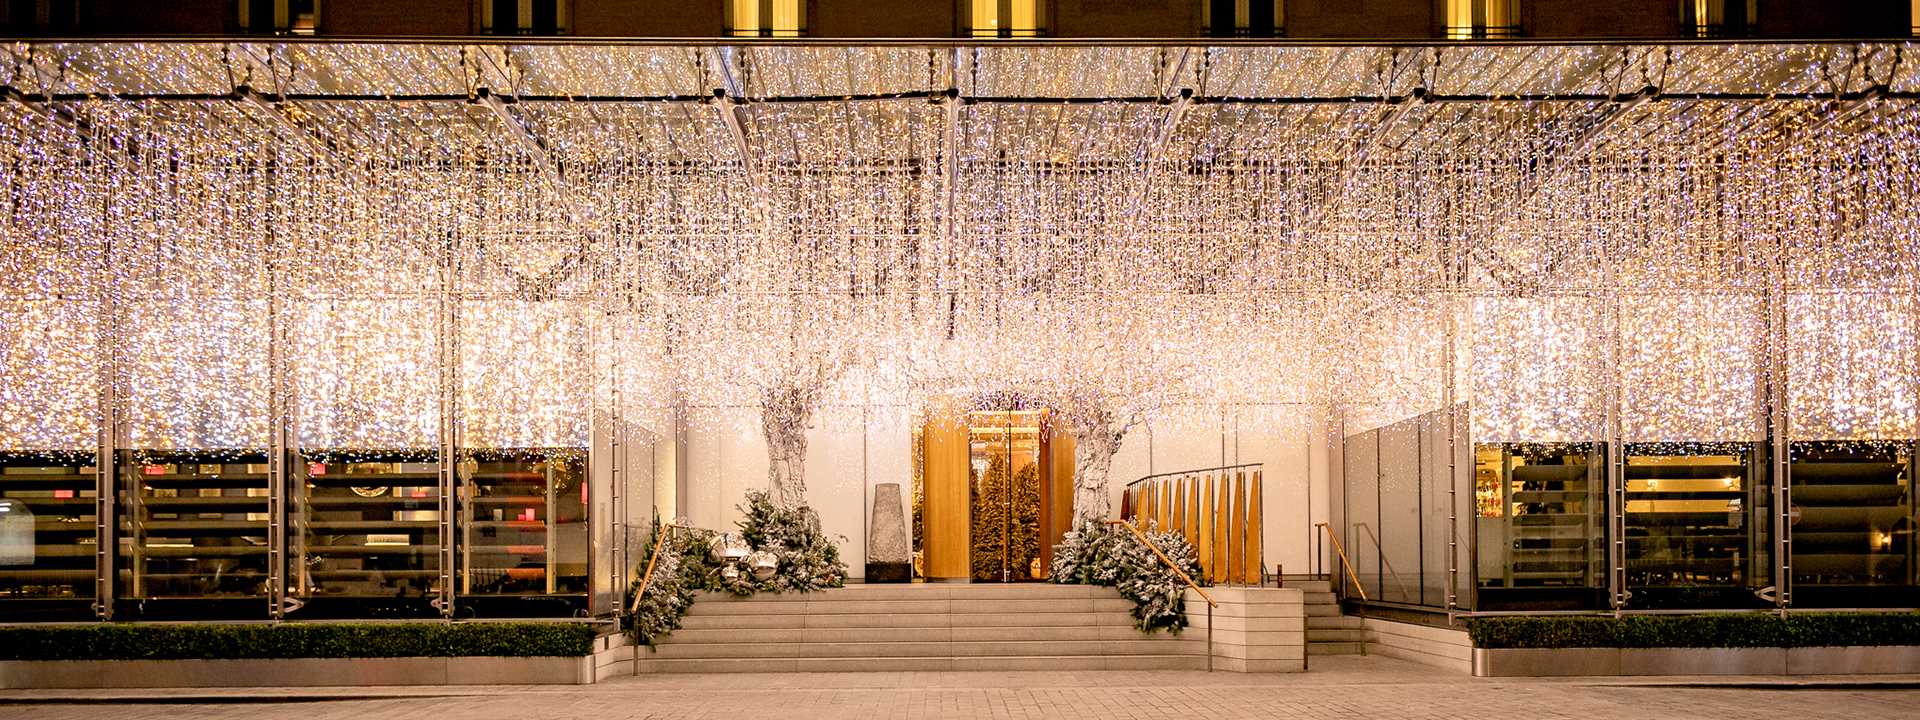 For the holiday season, the entrance to The Berkeley hotel is richly decorated with Christmas decorations.